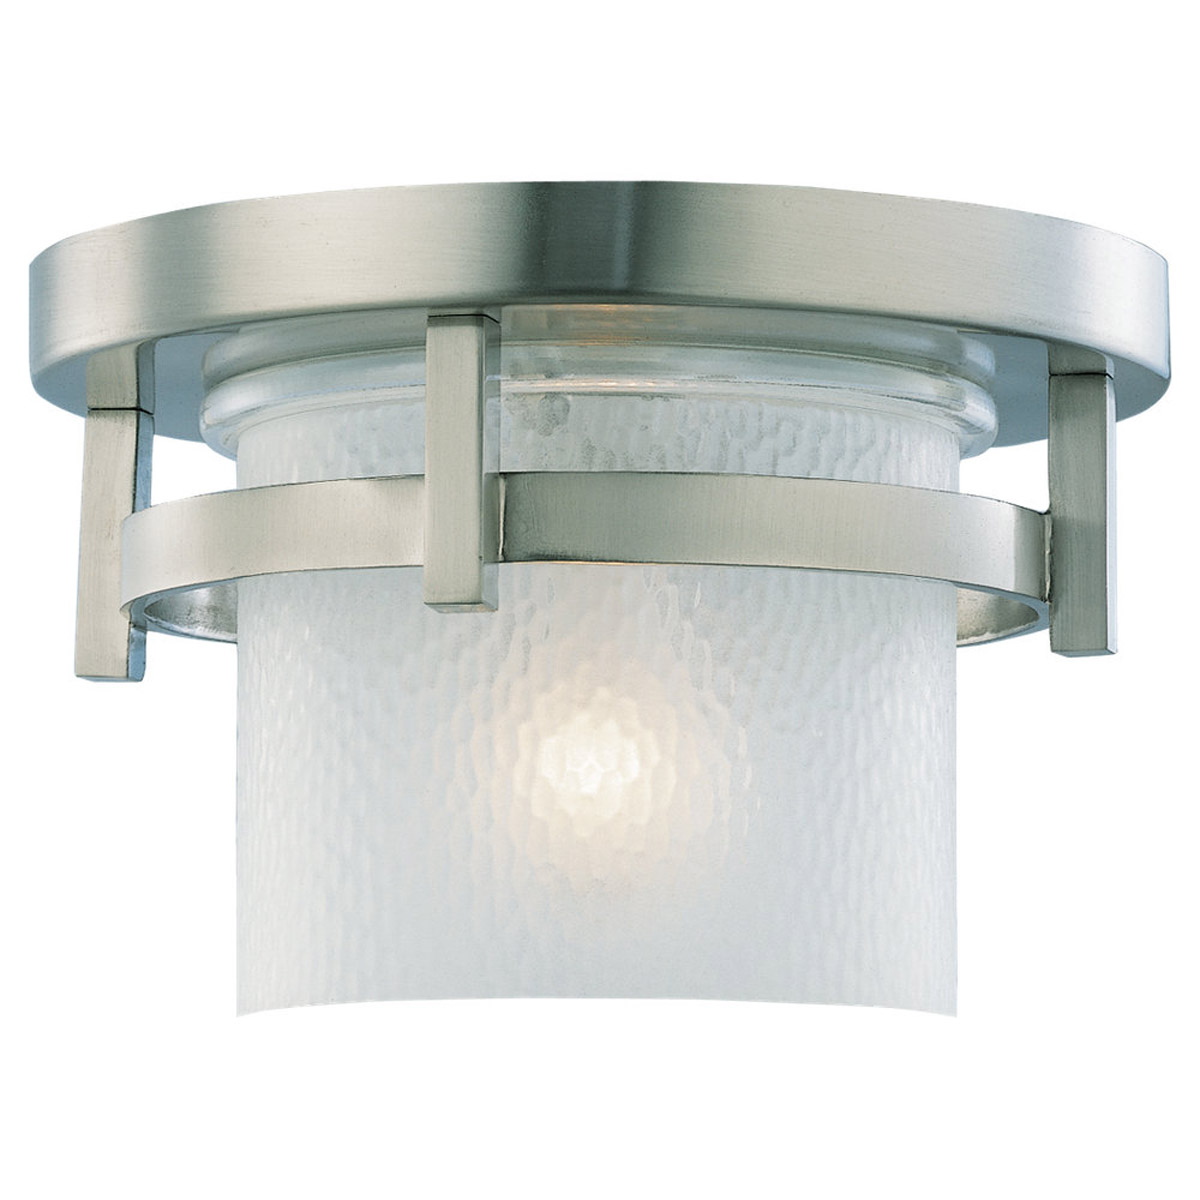 Sea Gull Lighting Eternity 1 Light Outdoor Ceiling Fixture in Brushed Nickel 89515BL-962